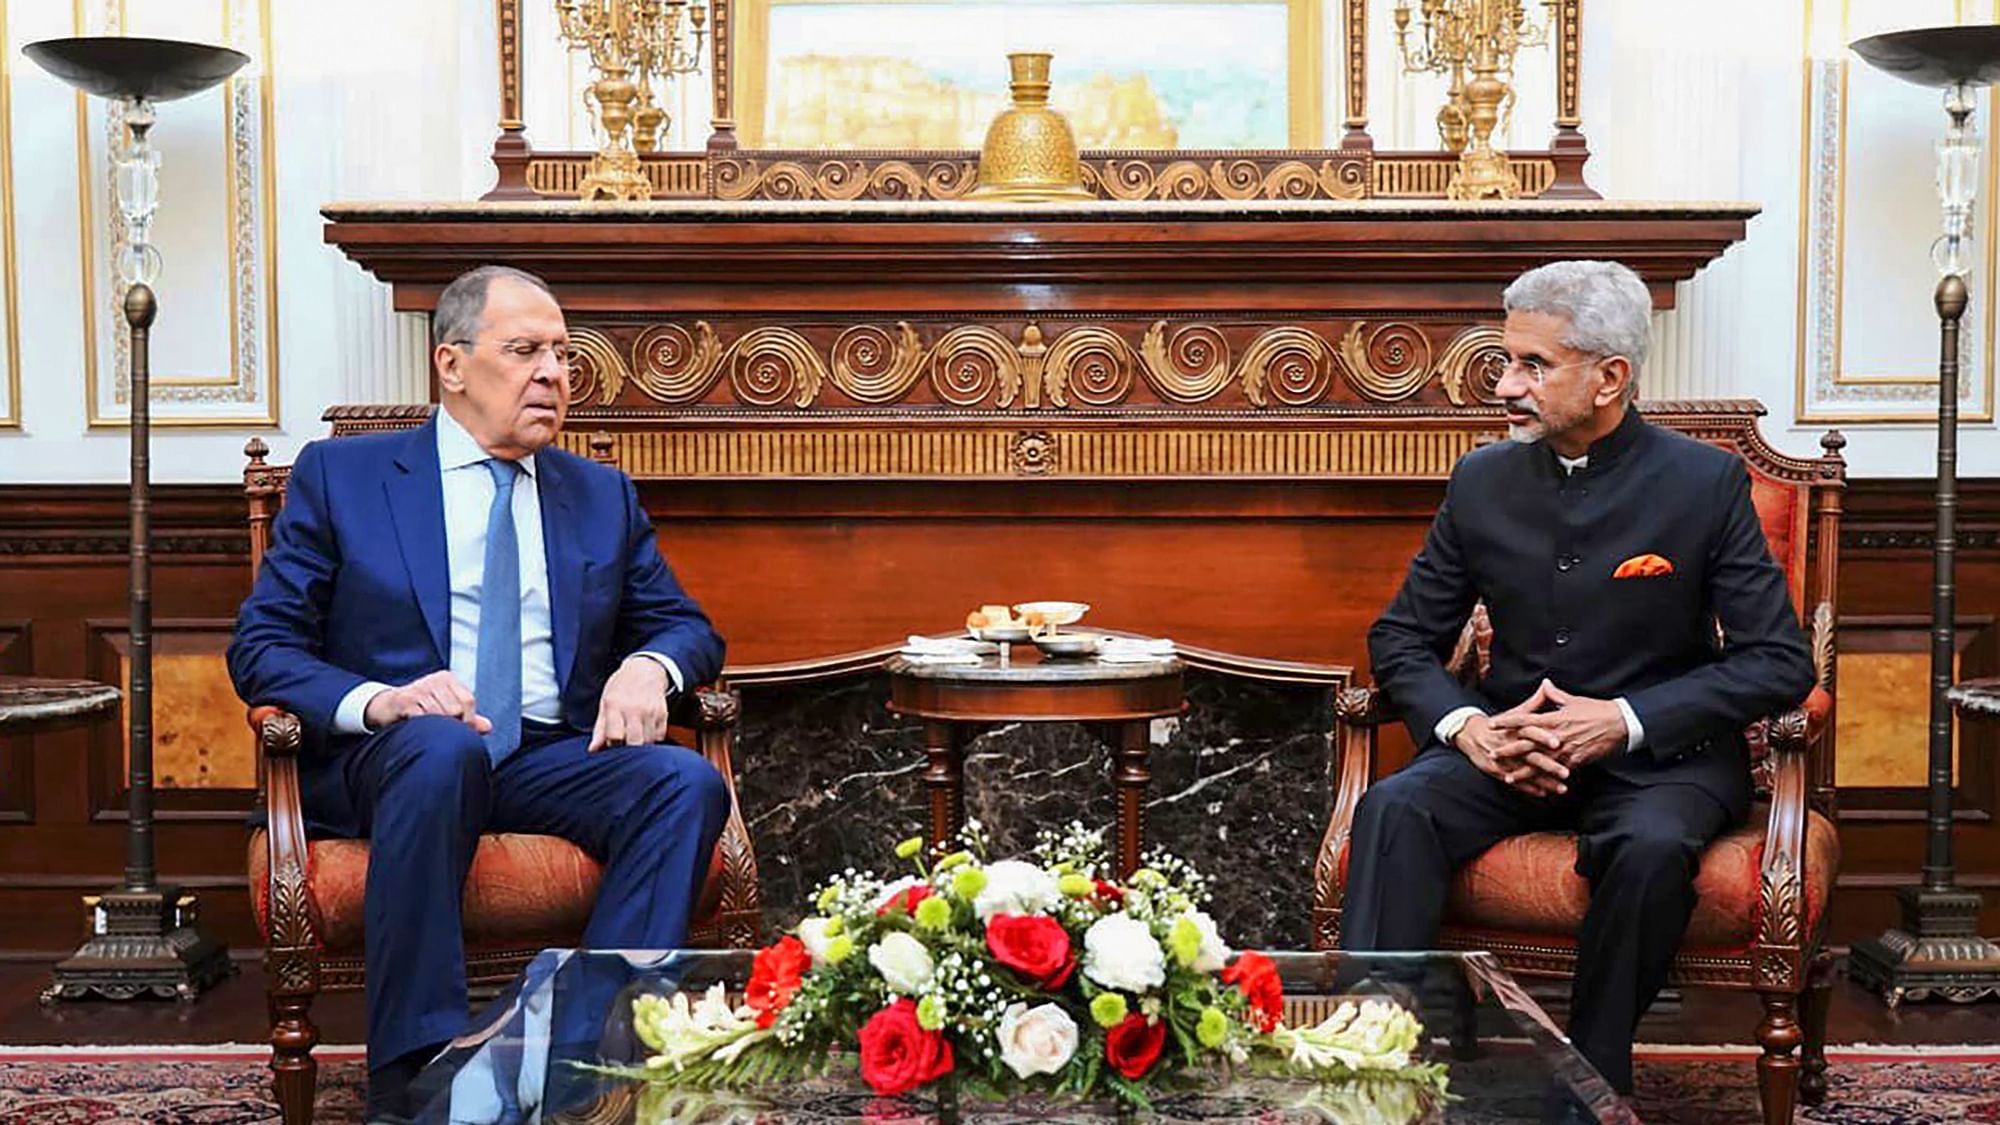 <div class="paragraphs"><p>External Affairs Minister S. Jaishankar interacts with Russia's Foreign Minister Sergey Lavrov during a meeting, in New Delhi.</p></div>